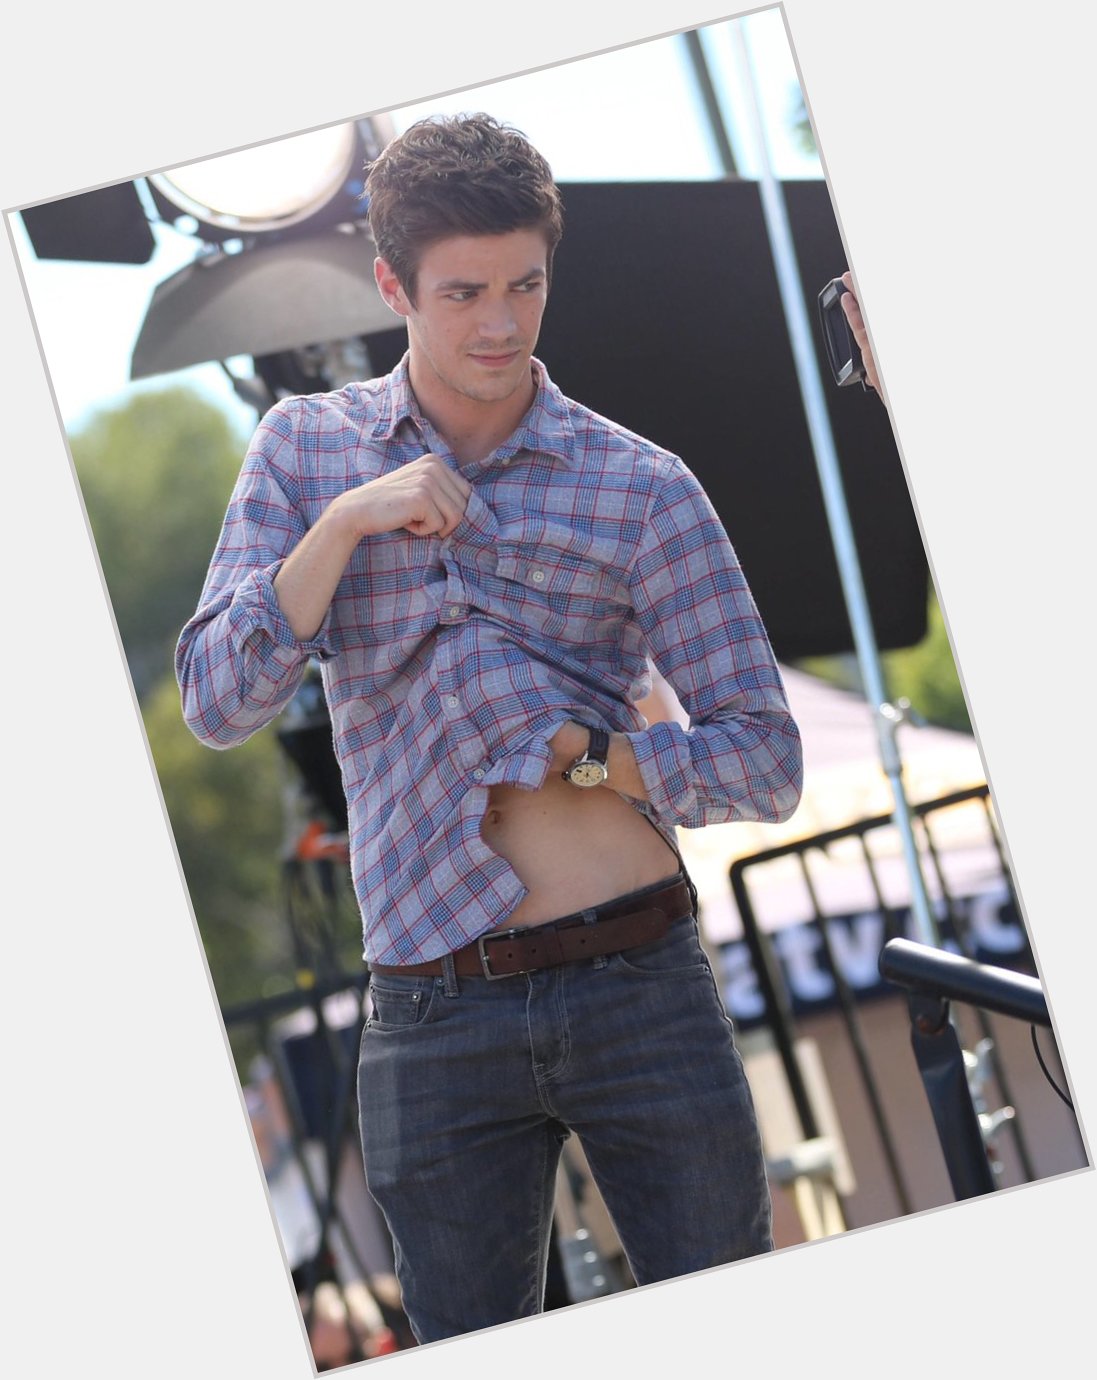 Flash and Happy Birthday  October 6, 2014 - Grant Gustin visits \"Extra\" in Los Angeles, CA. 